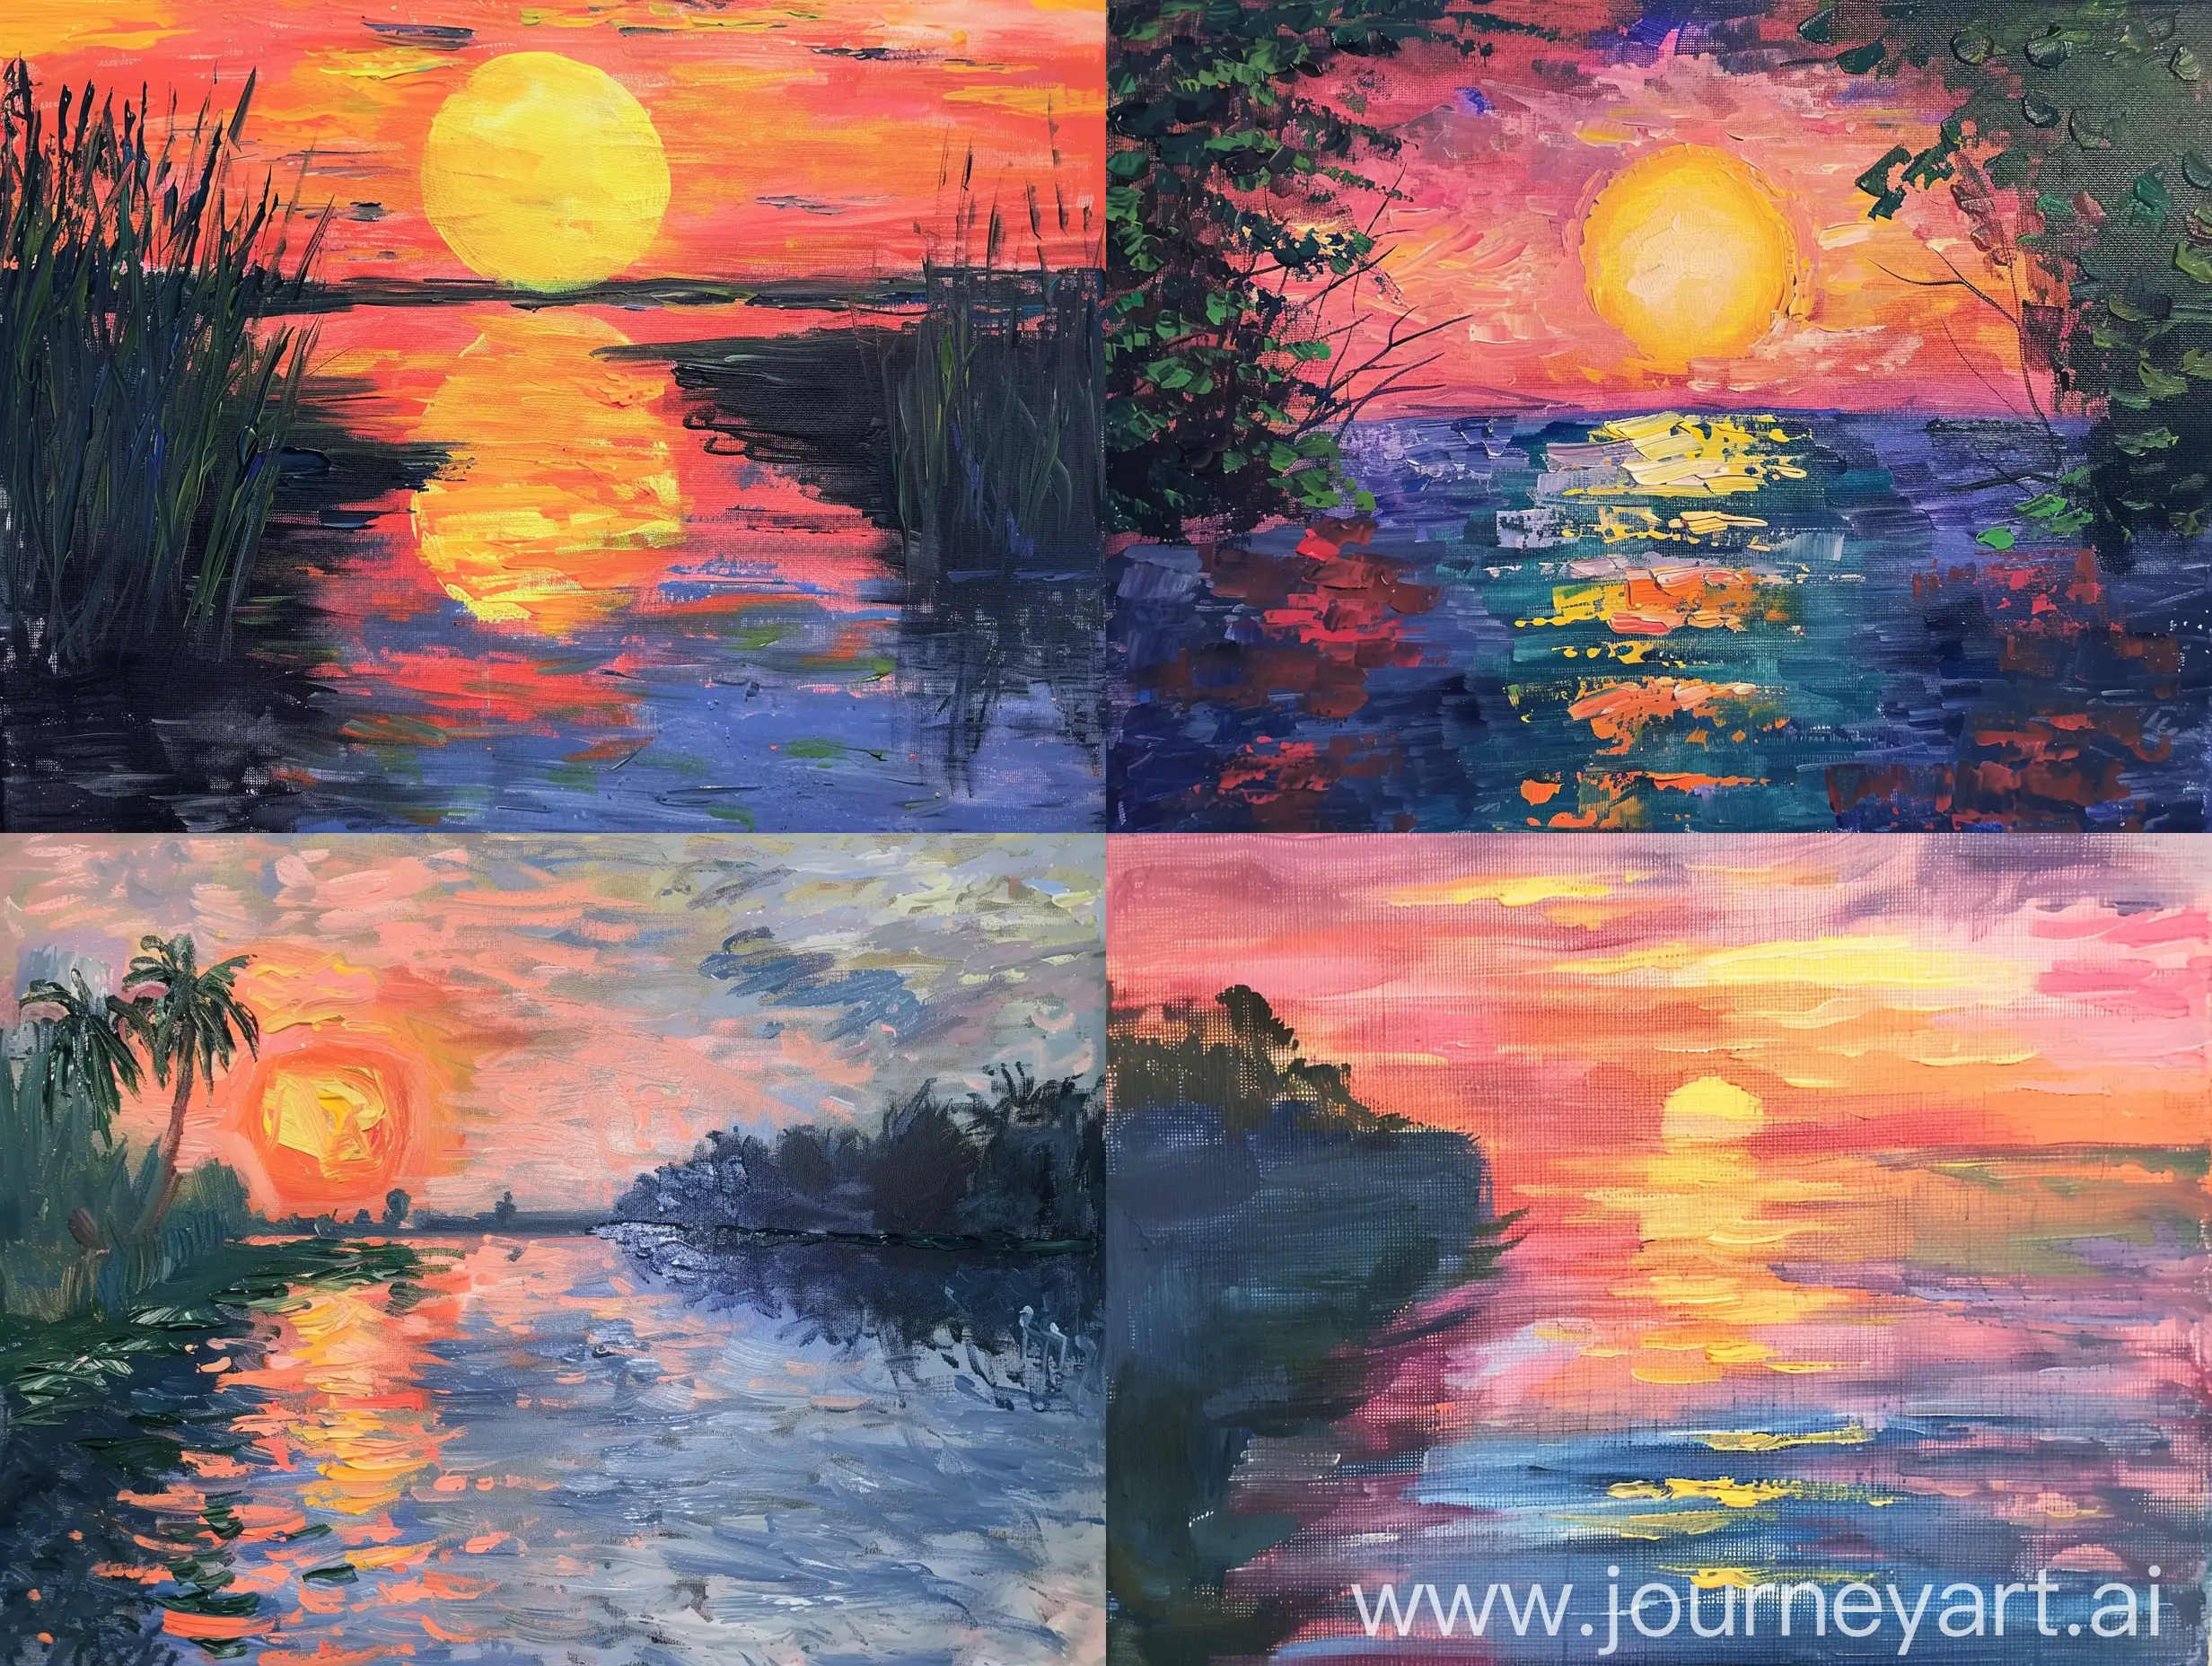 Paint a sunset themed painting in the style of Monet